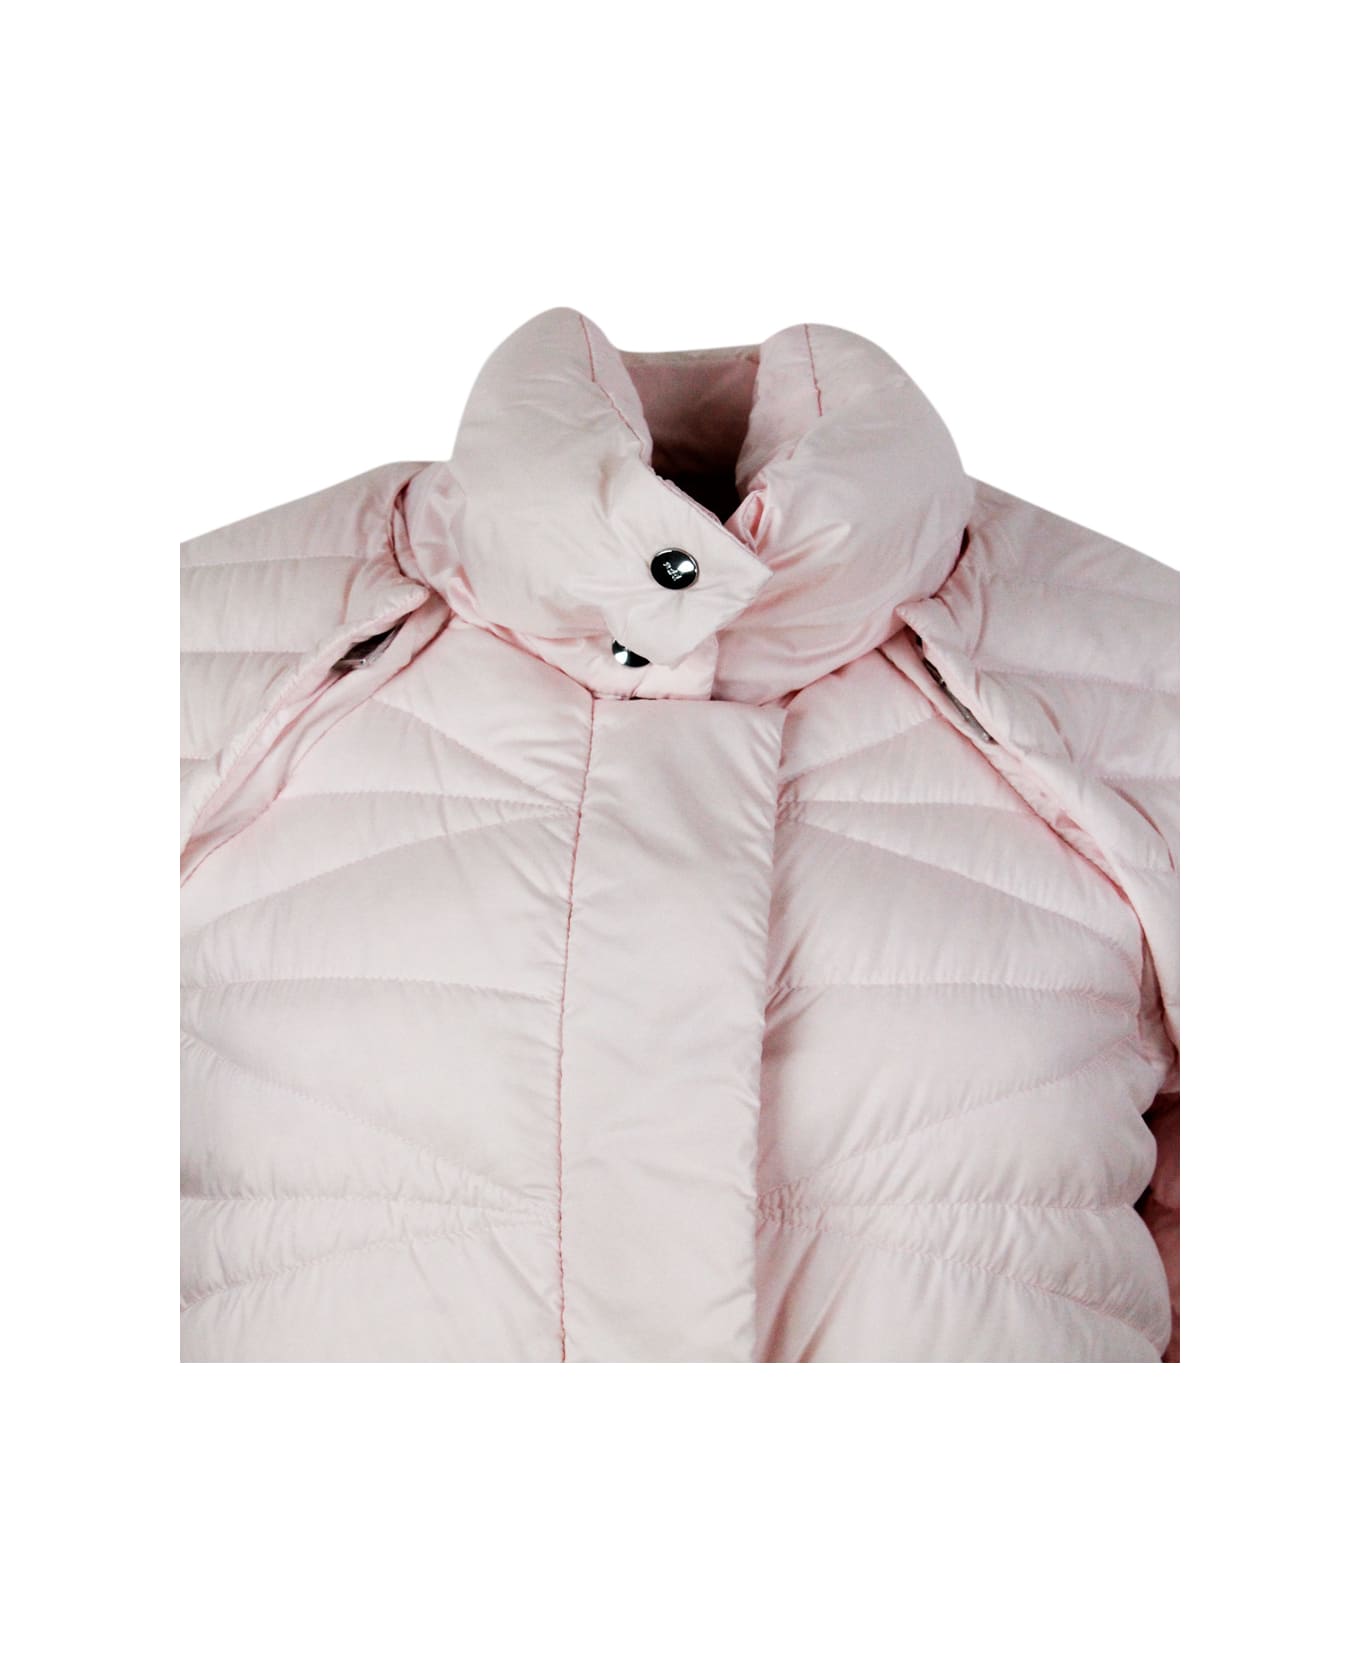 Add 100 Gram Down Jacket With High Quality Feathers. The Sleeves Are Detachable With A Convenient Zip. Side Pockets And Zip And Button Closure - Pink